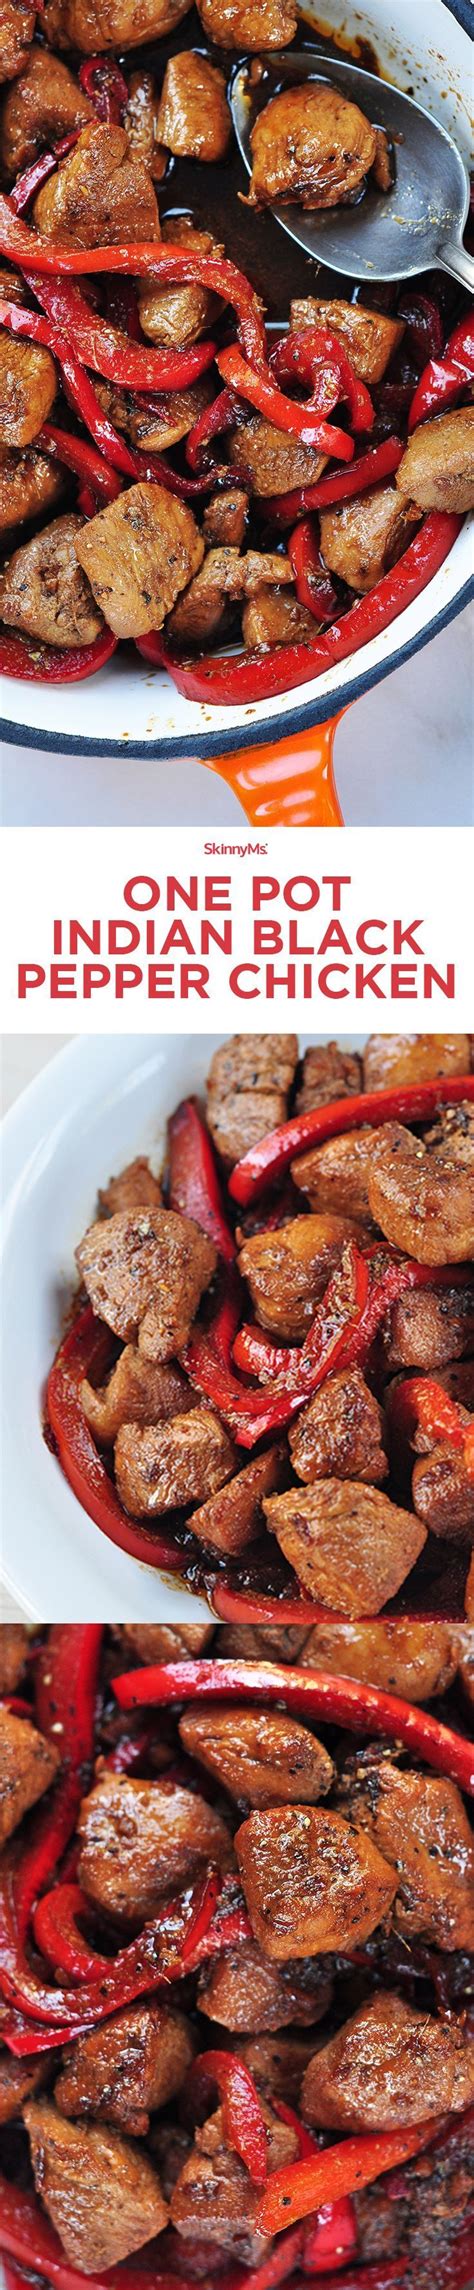 Black pepper chicken is one of my favorite meals and on my regular dinner menu. One-Pot Black Pepper Chicken | Recipe | Recipes, Indian ...